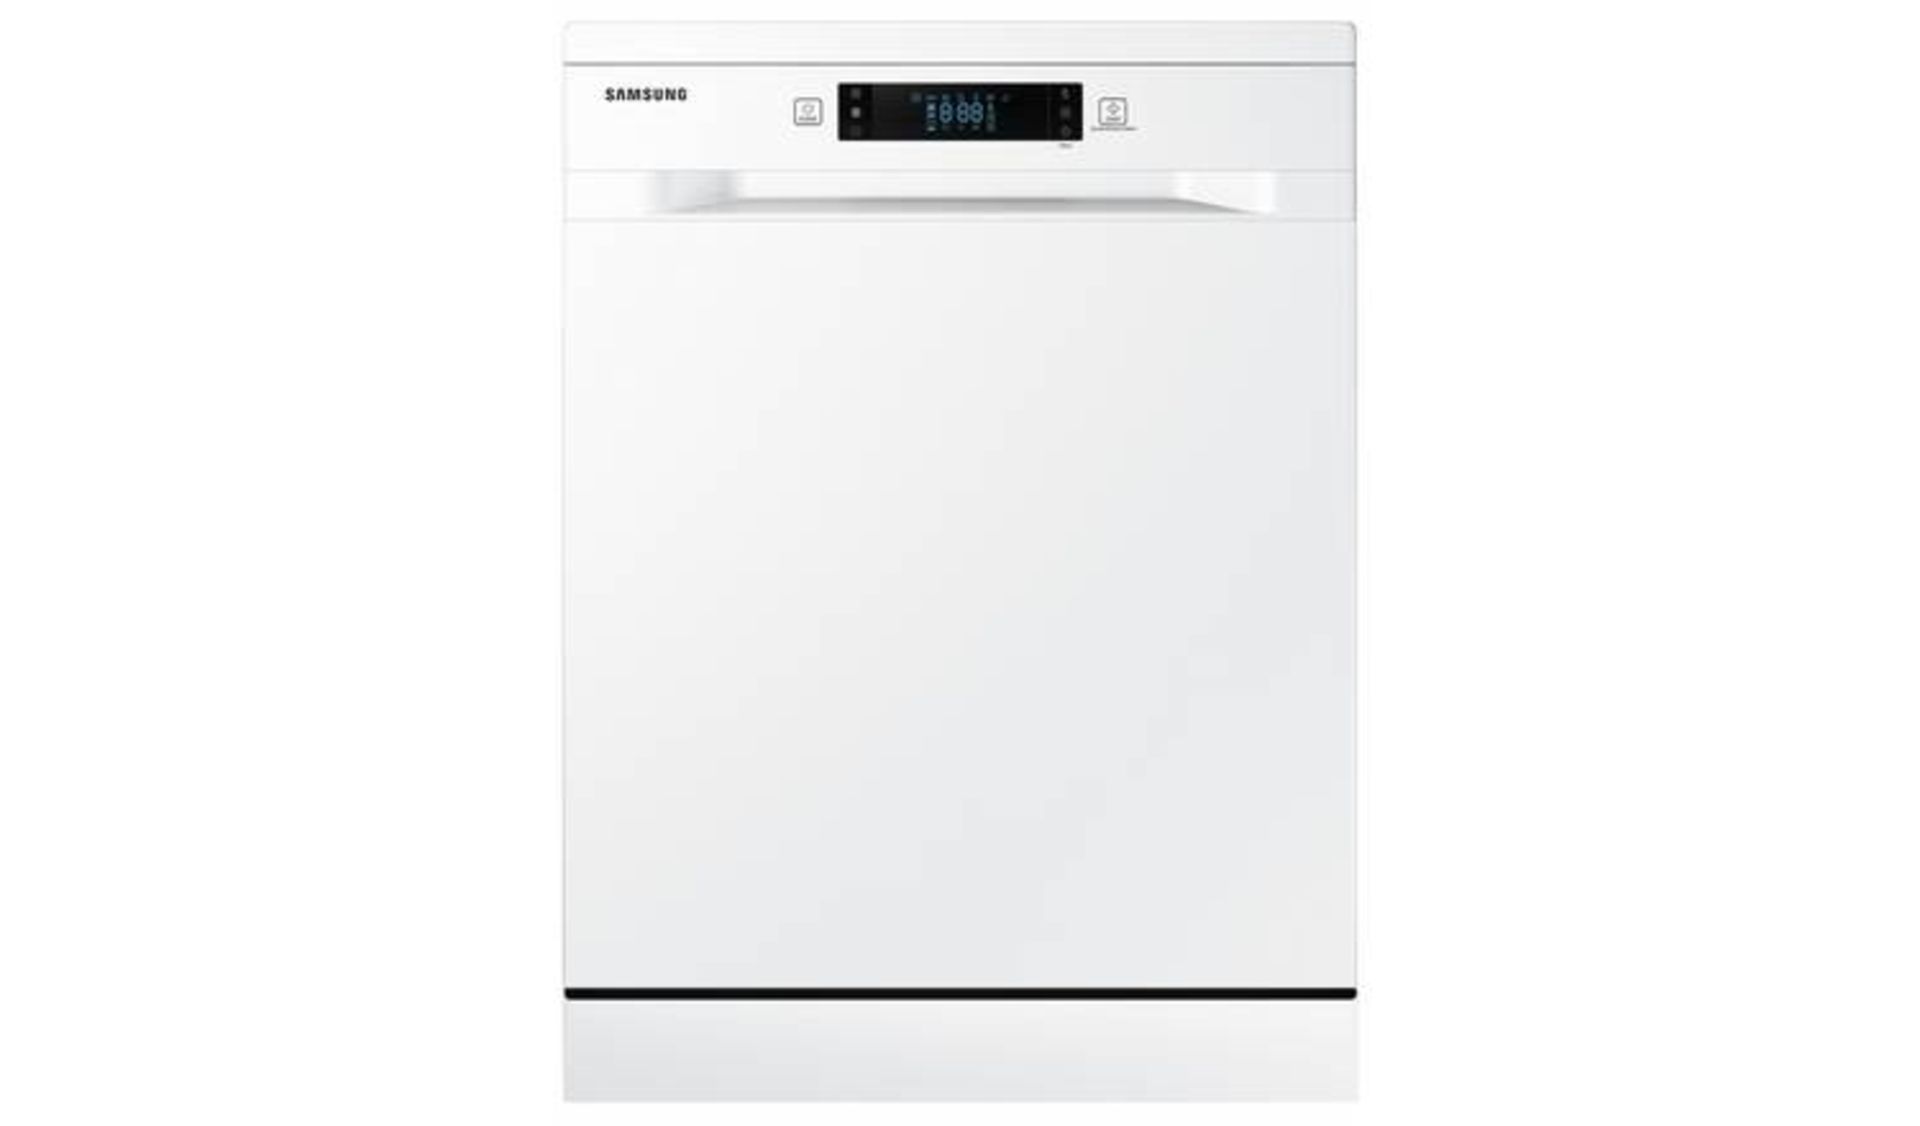 + VAT Grade A/B Samsung Series 6 DW60M6050FW Full Size Dishwasher - A++ Energy Rating - 30 Minute